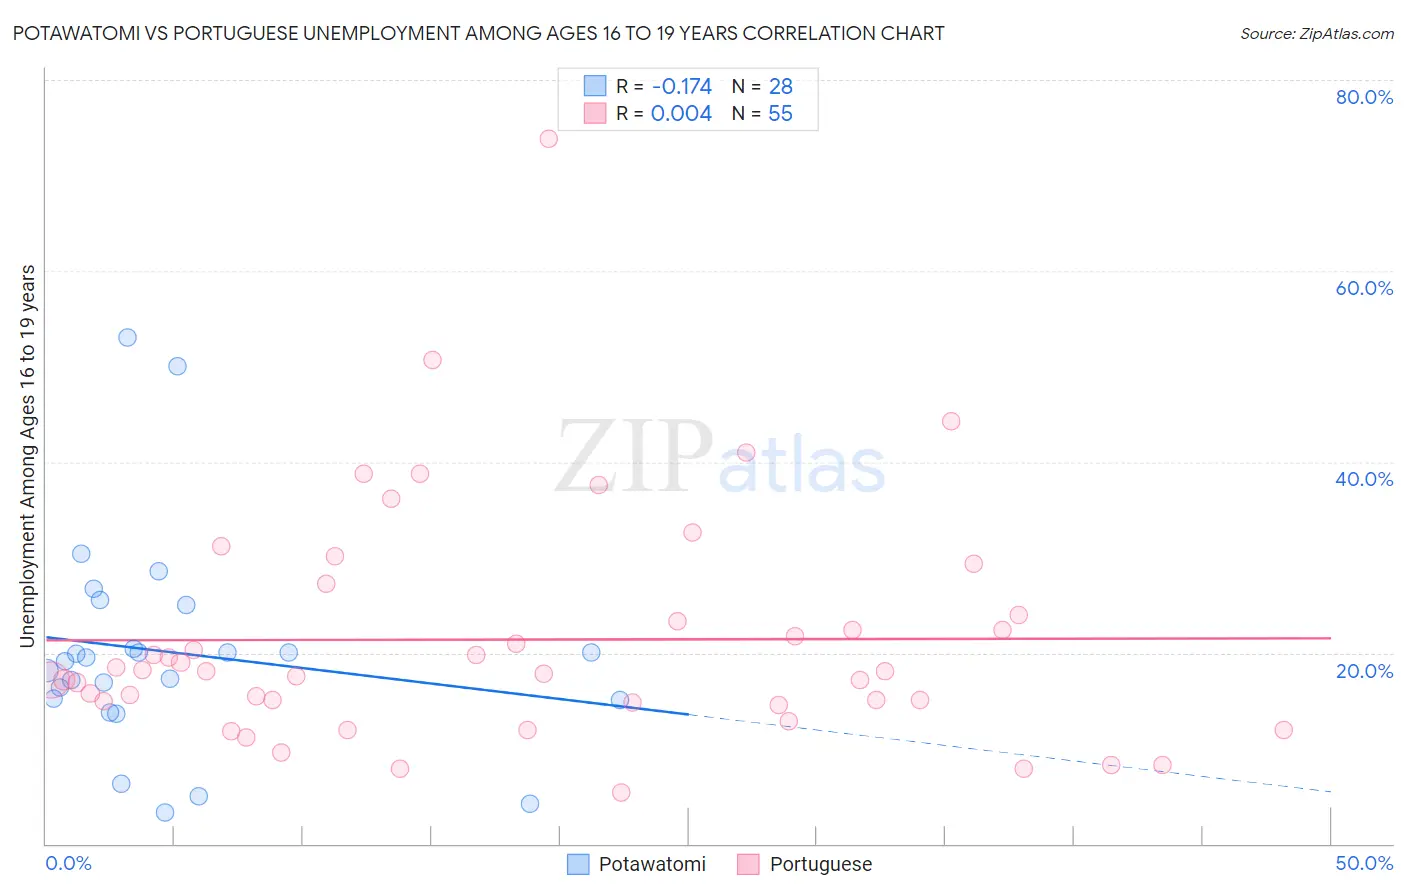 Potawatomi vs Portuguese Unemployment Among Ages 16 to 19 years